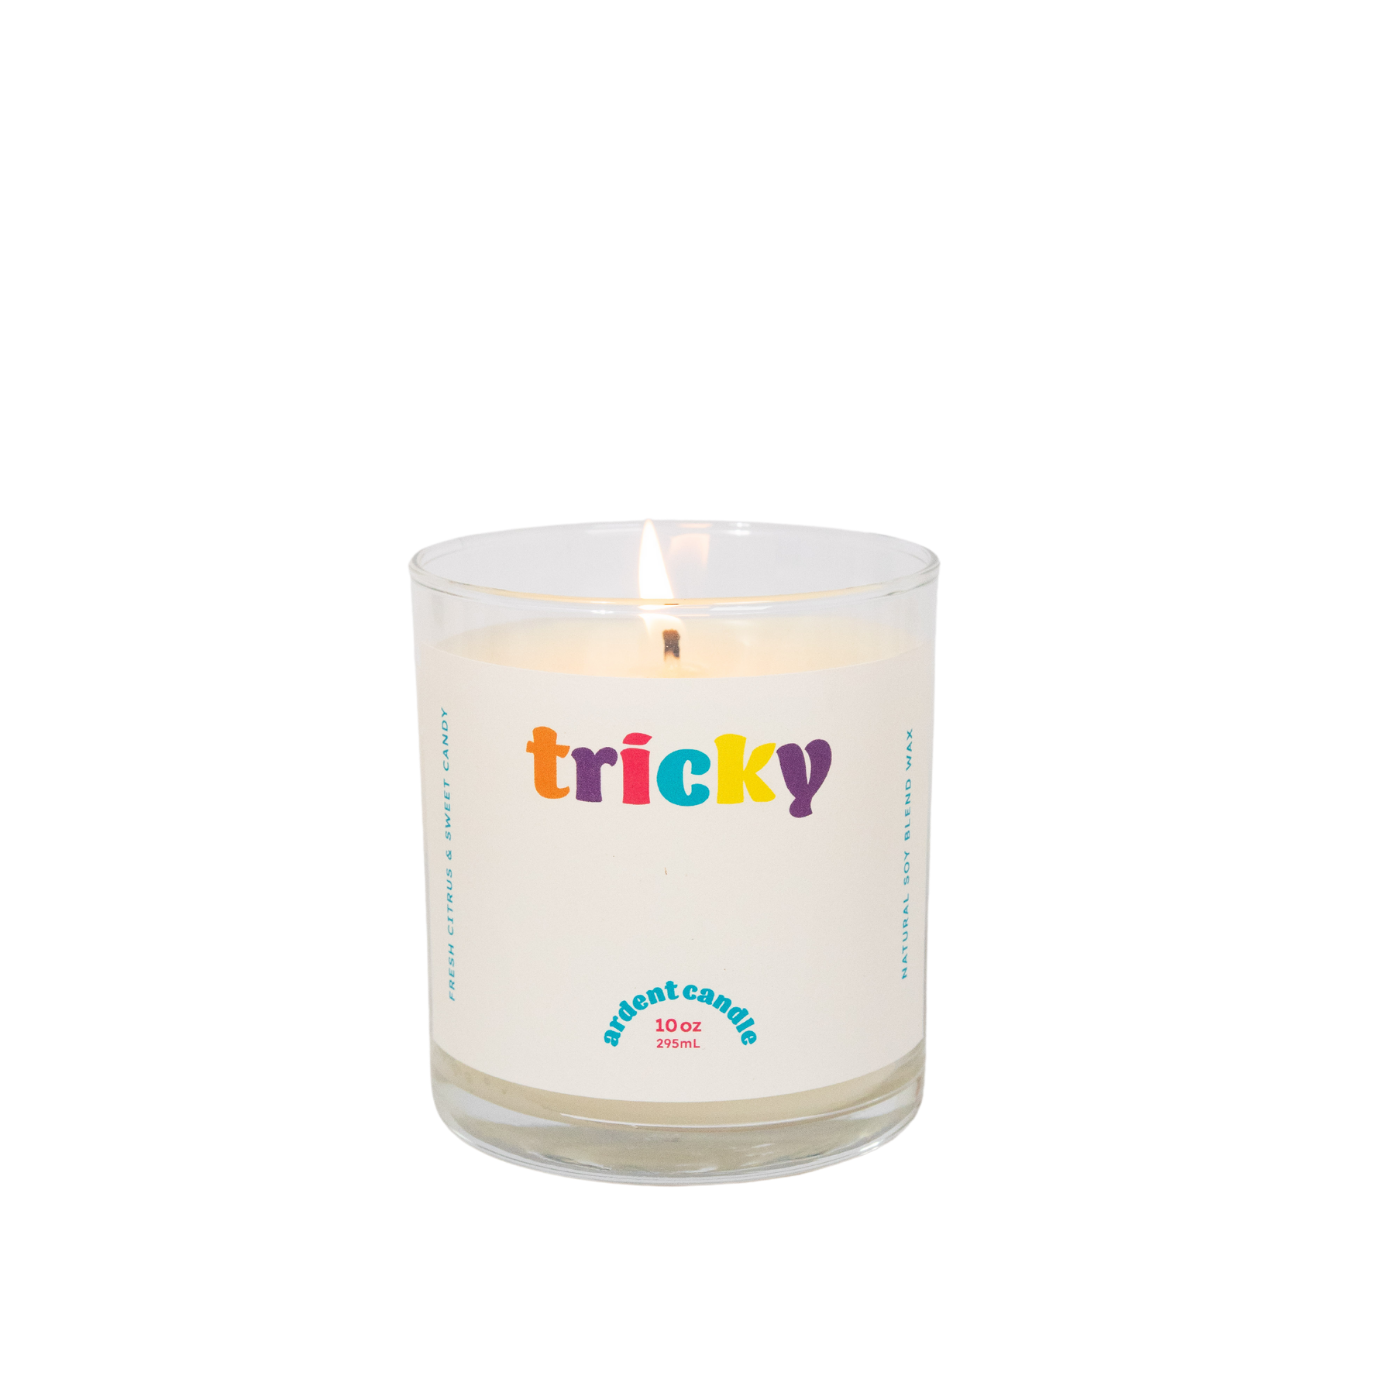 Its Tricky by Ardent Candle